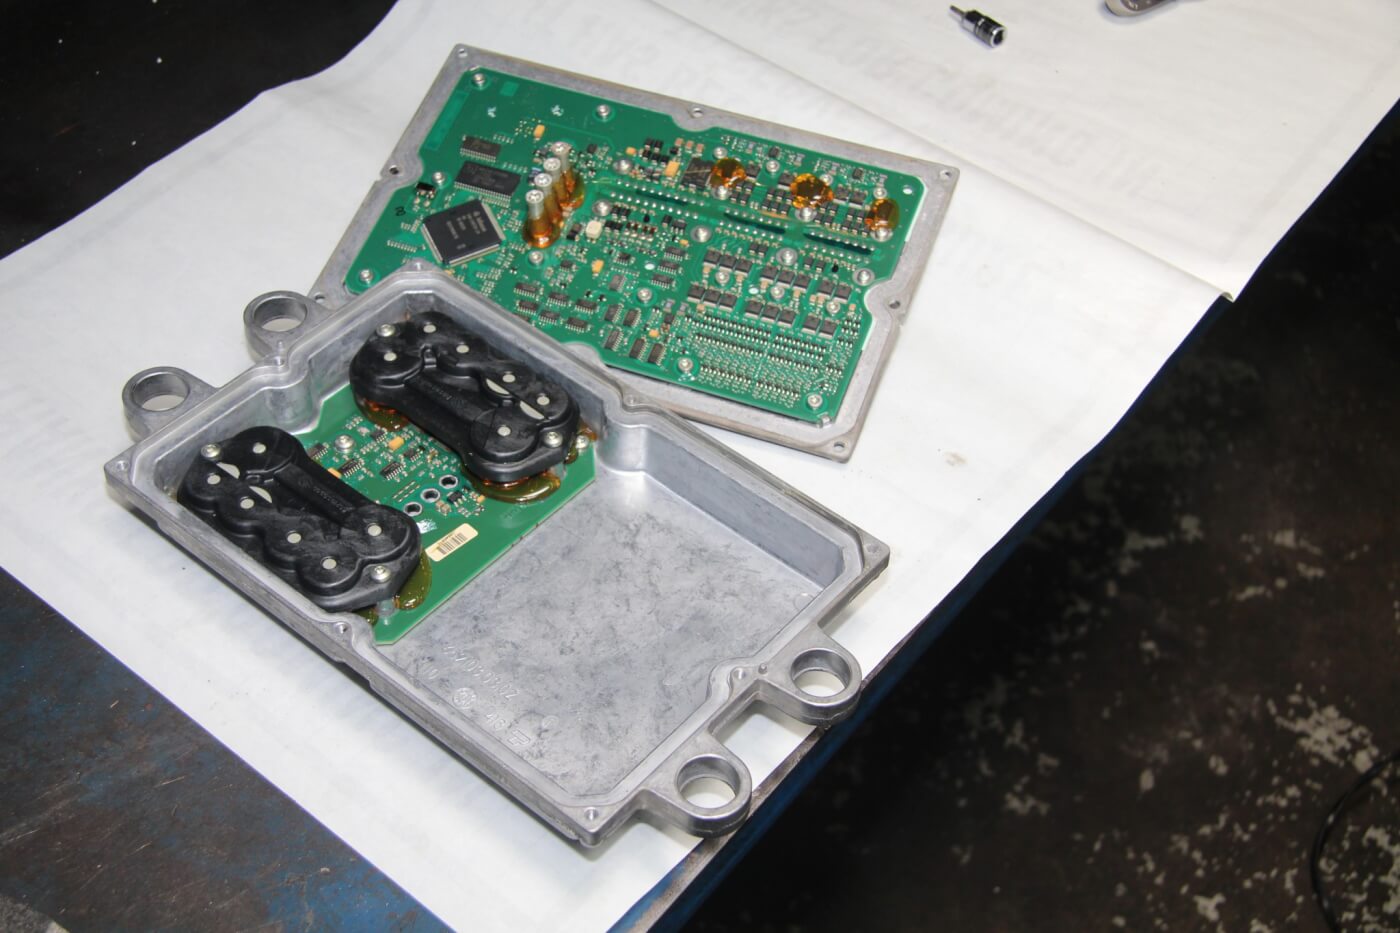 7. This is the inside of a stock FICM. When upgrading just the power supply, the upper half of the case and the control board are retained. Replacing the entire unit is always an option, but more often than not it’s the power supply, rather than the control board, that’s the source of the problem.